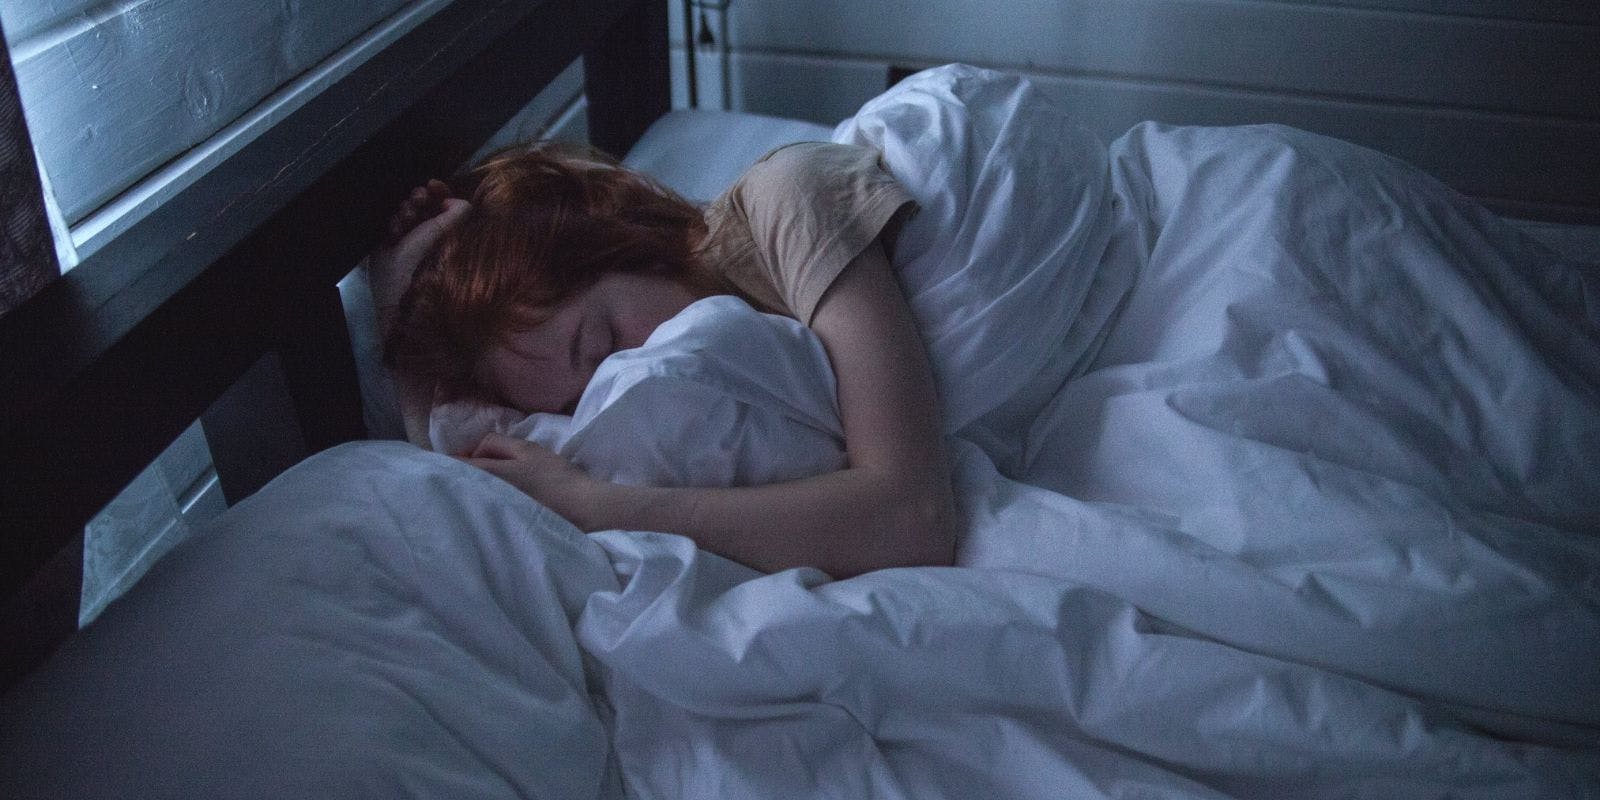 Ways Your Period Can Affect Your Sleep